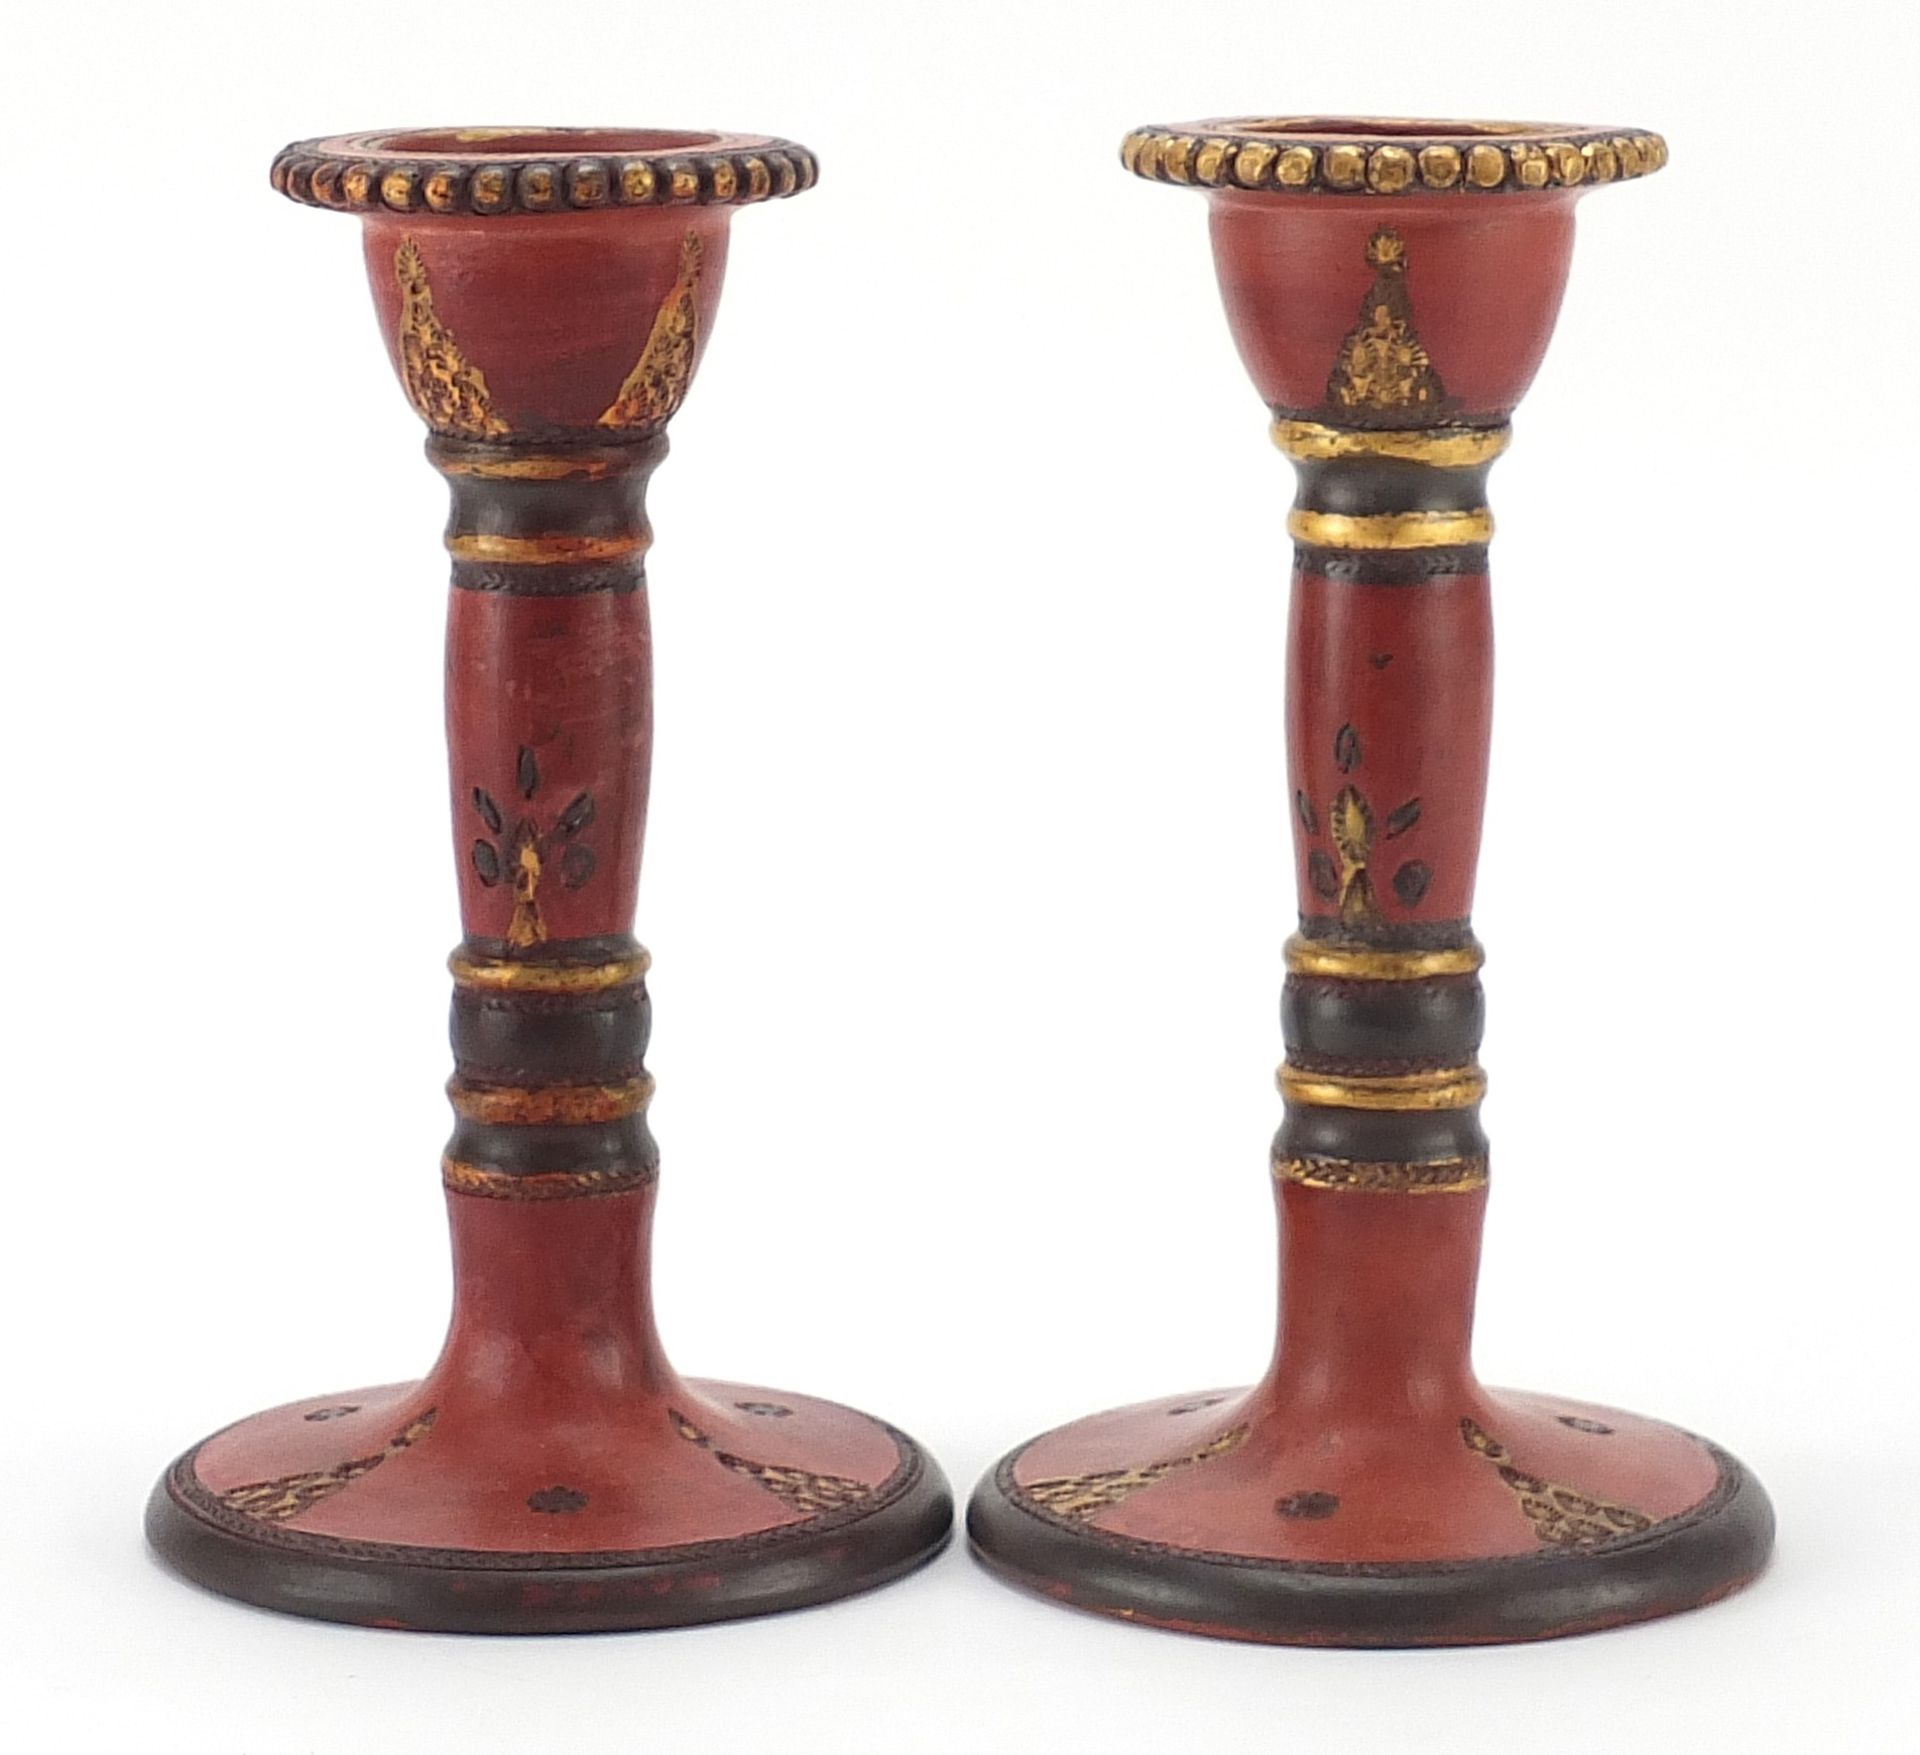 Pair of Turkish Tophane pottery candlesticks, each 18cm high - Image 2 of 4